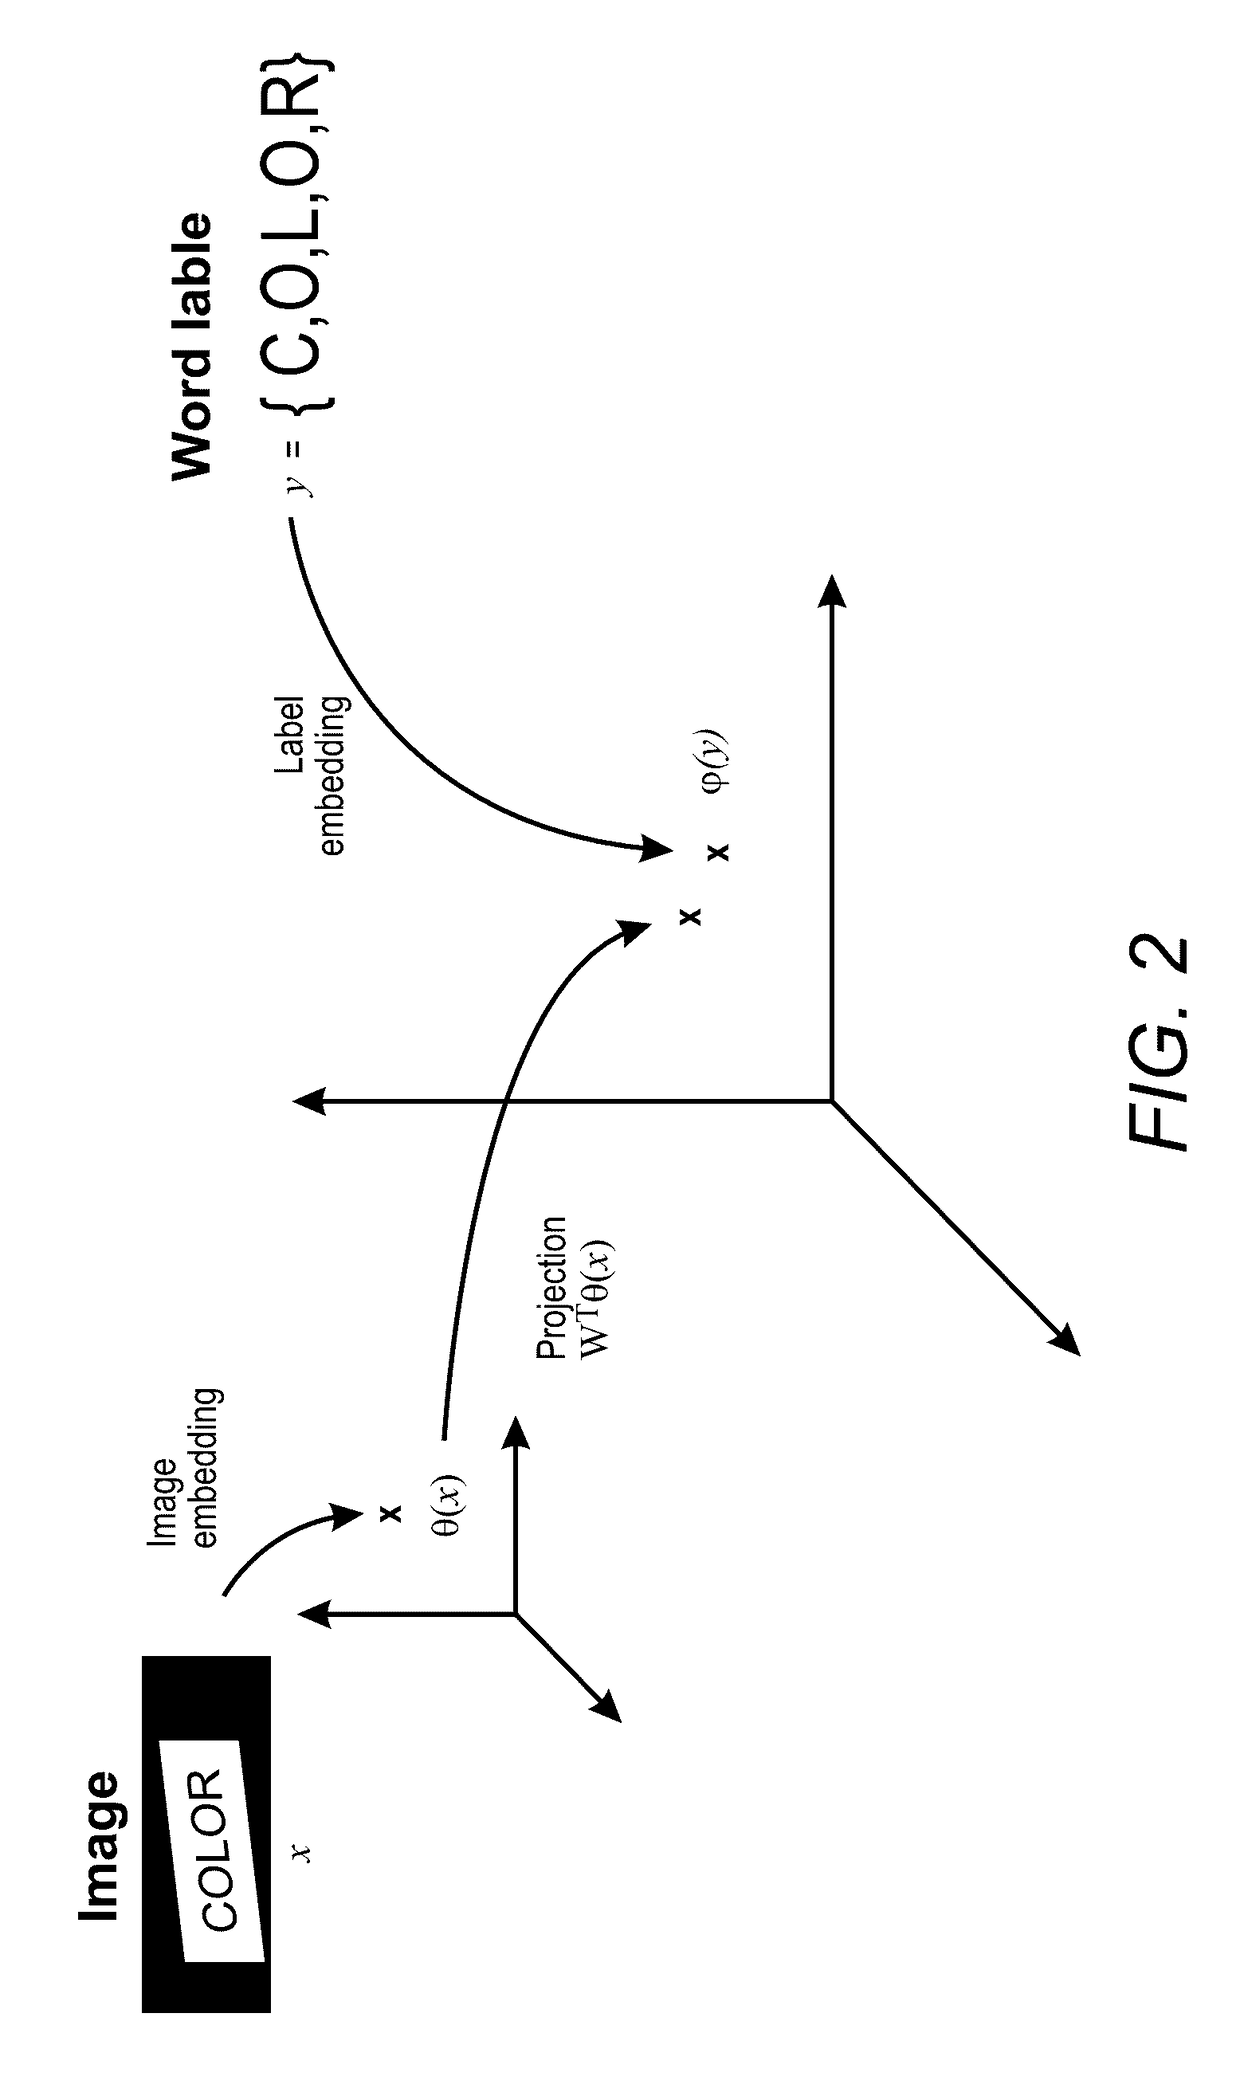 Method and system to perform text-to-image queries with wildcards